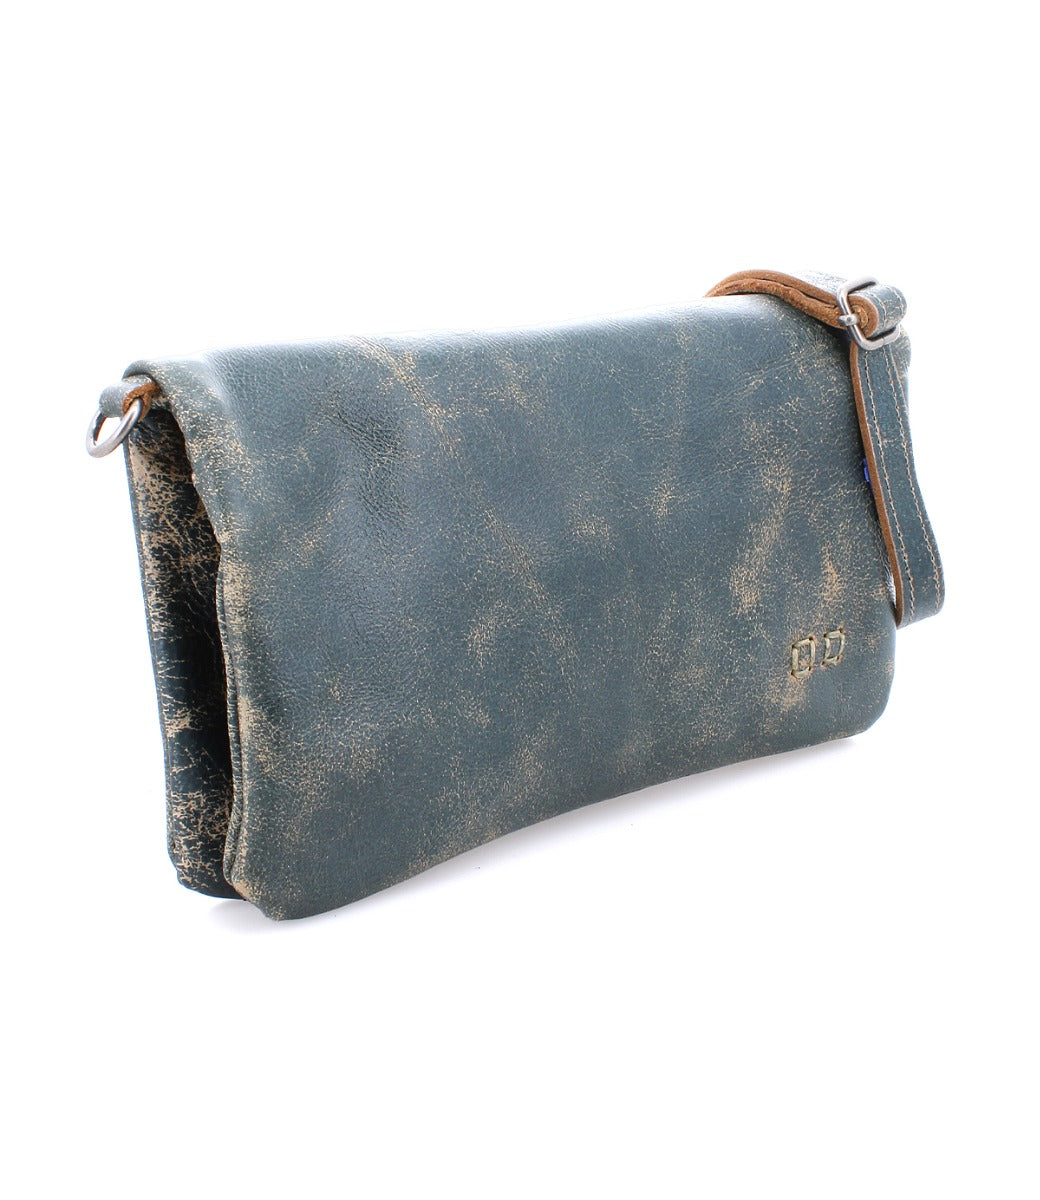 A teal leather Cadence clutch bag with a leather strap, by Bed Stu.